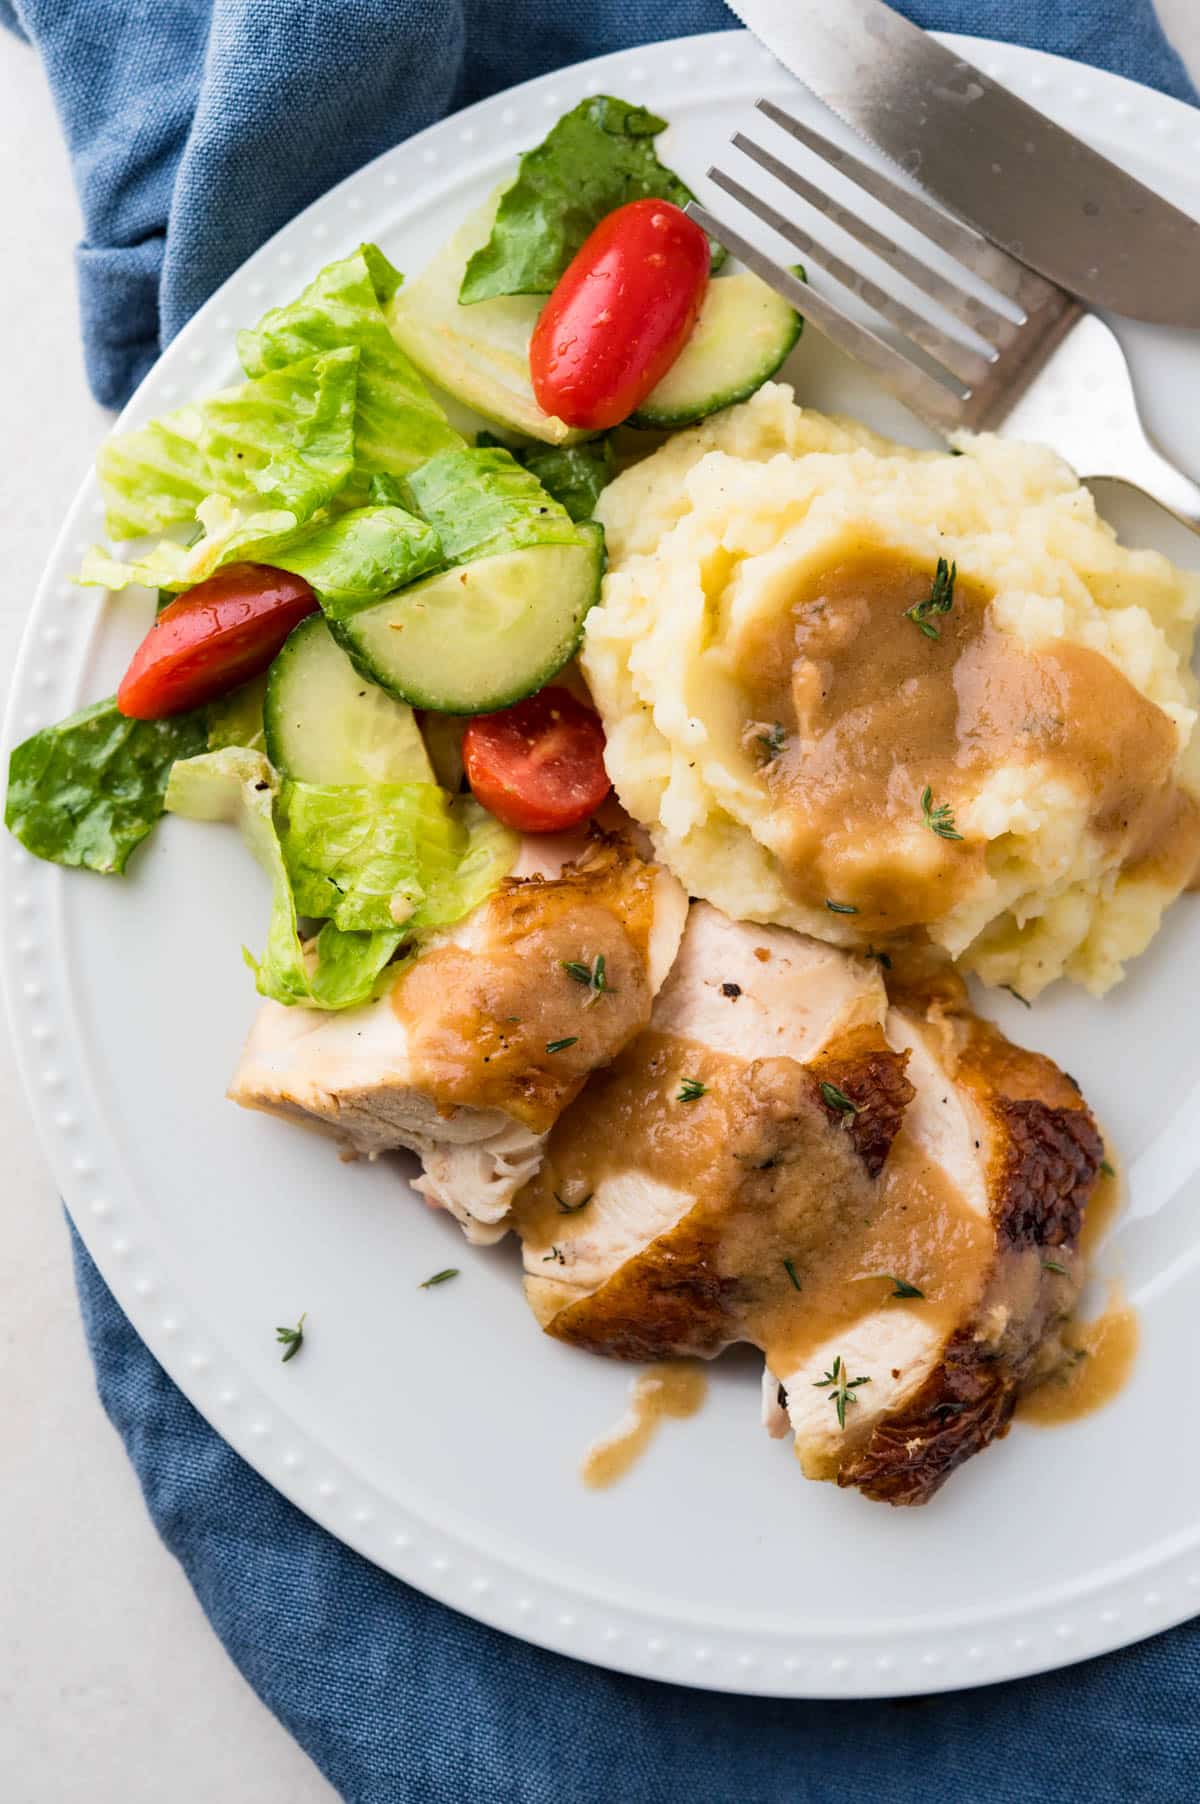 A white plate serving grilled chicken, mashed potatoes and gravy with a green salad.